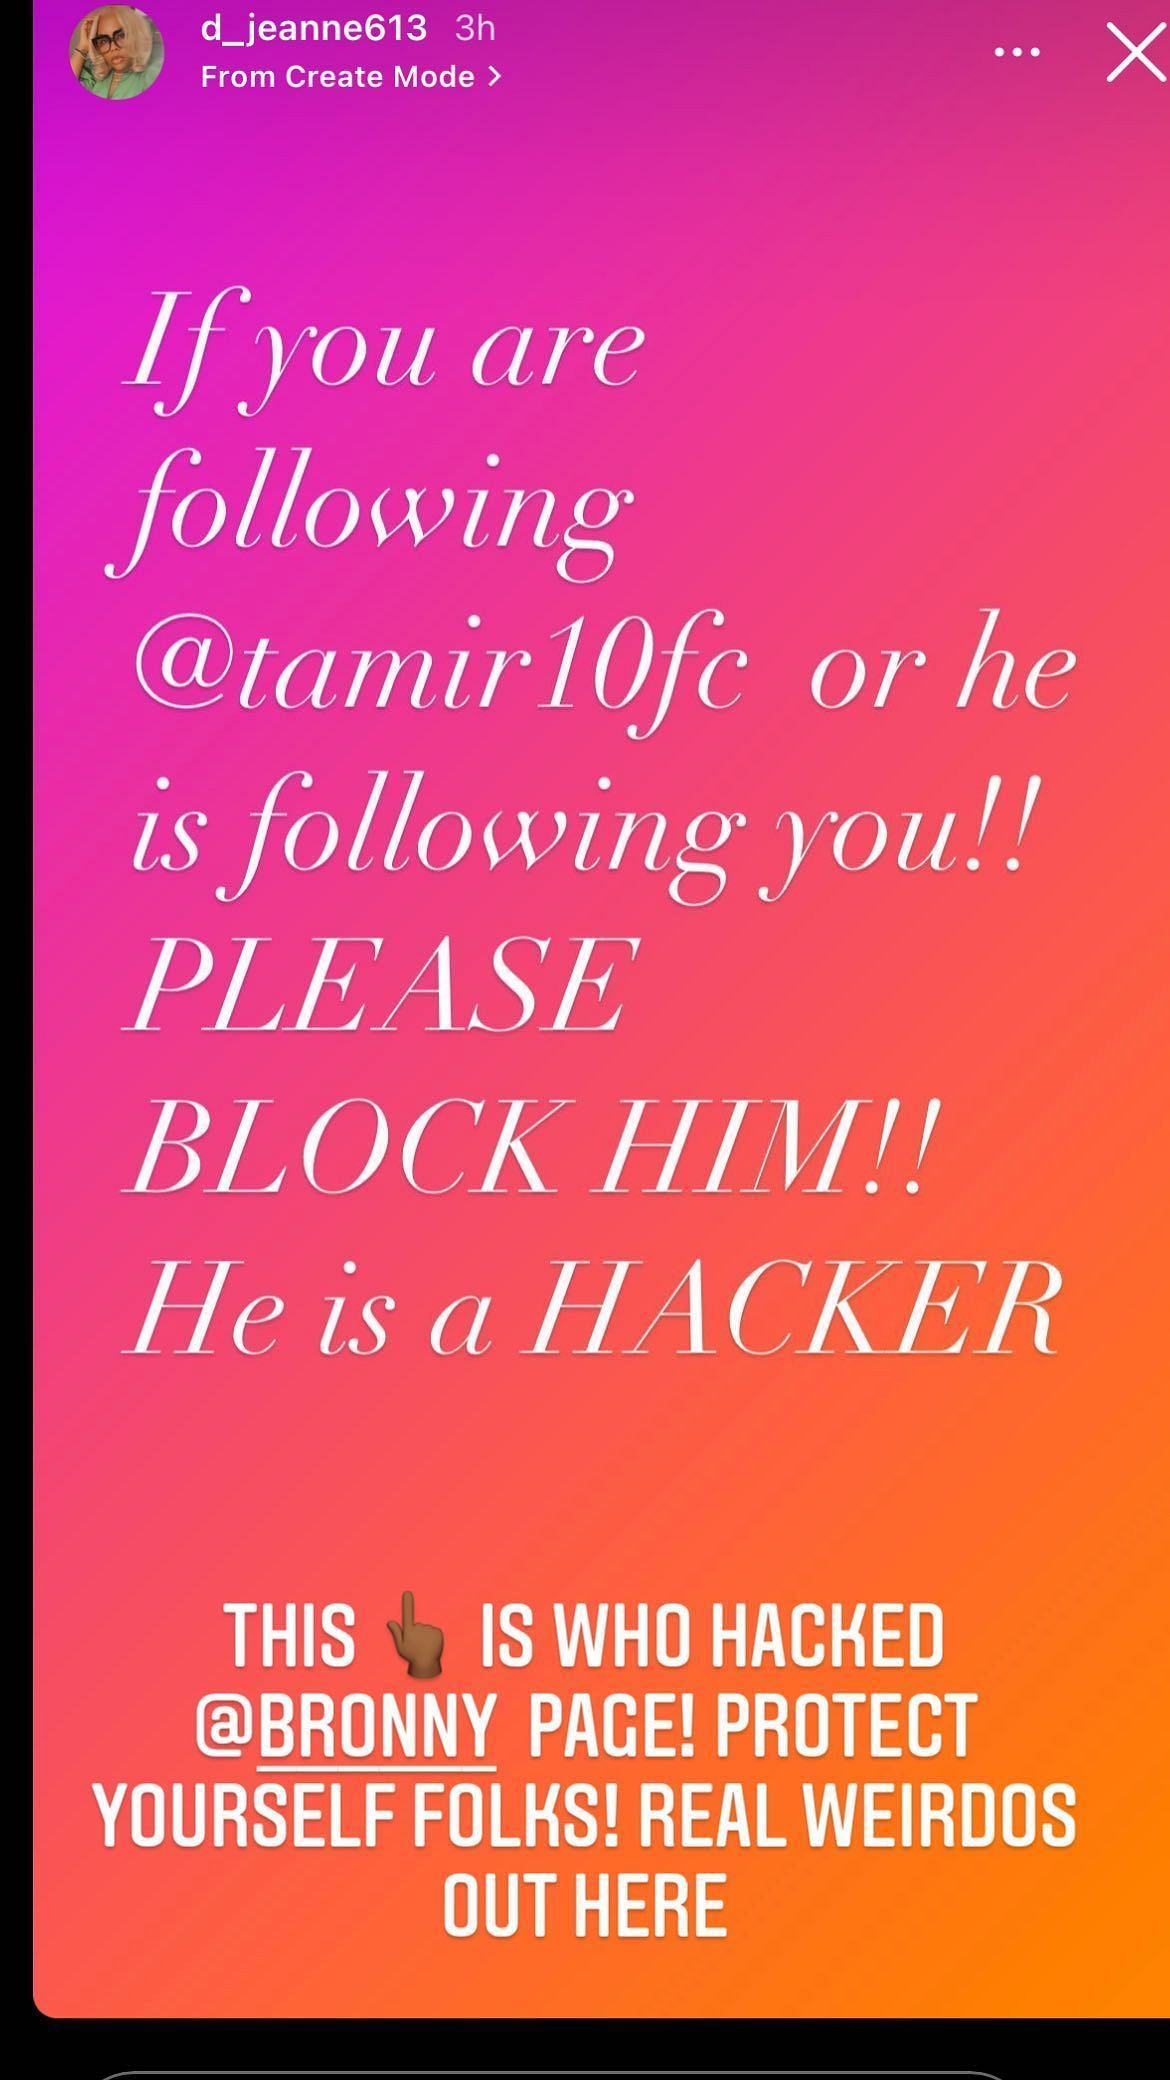 LeBron James urging his fans to block the hacker